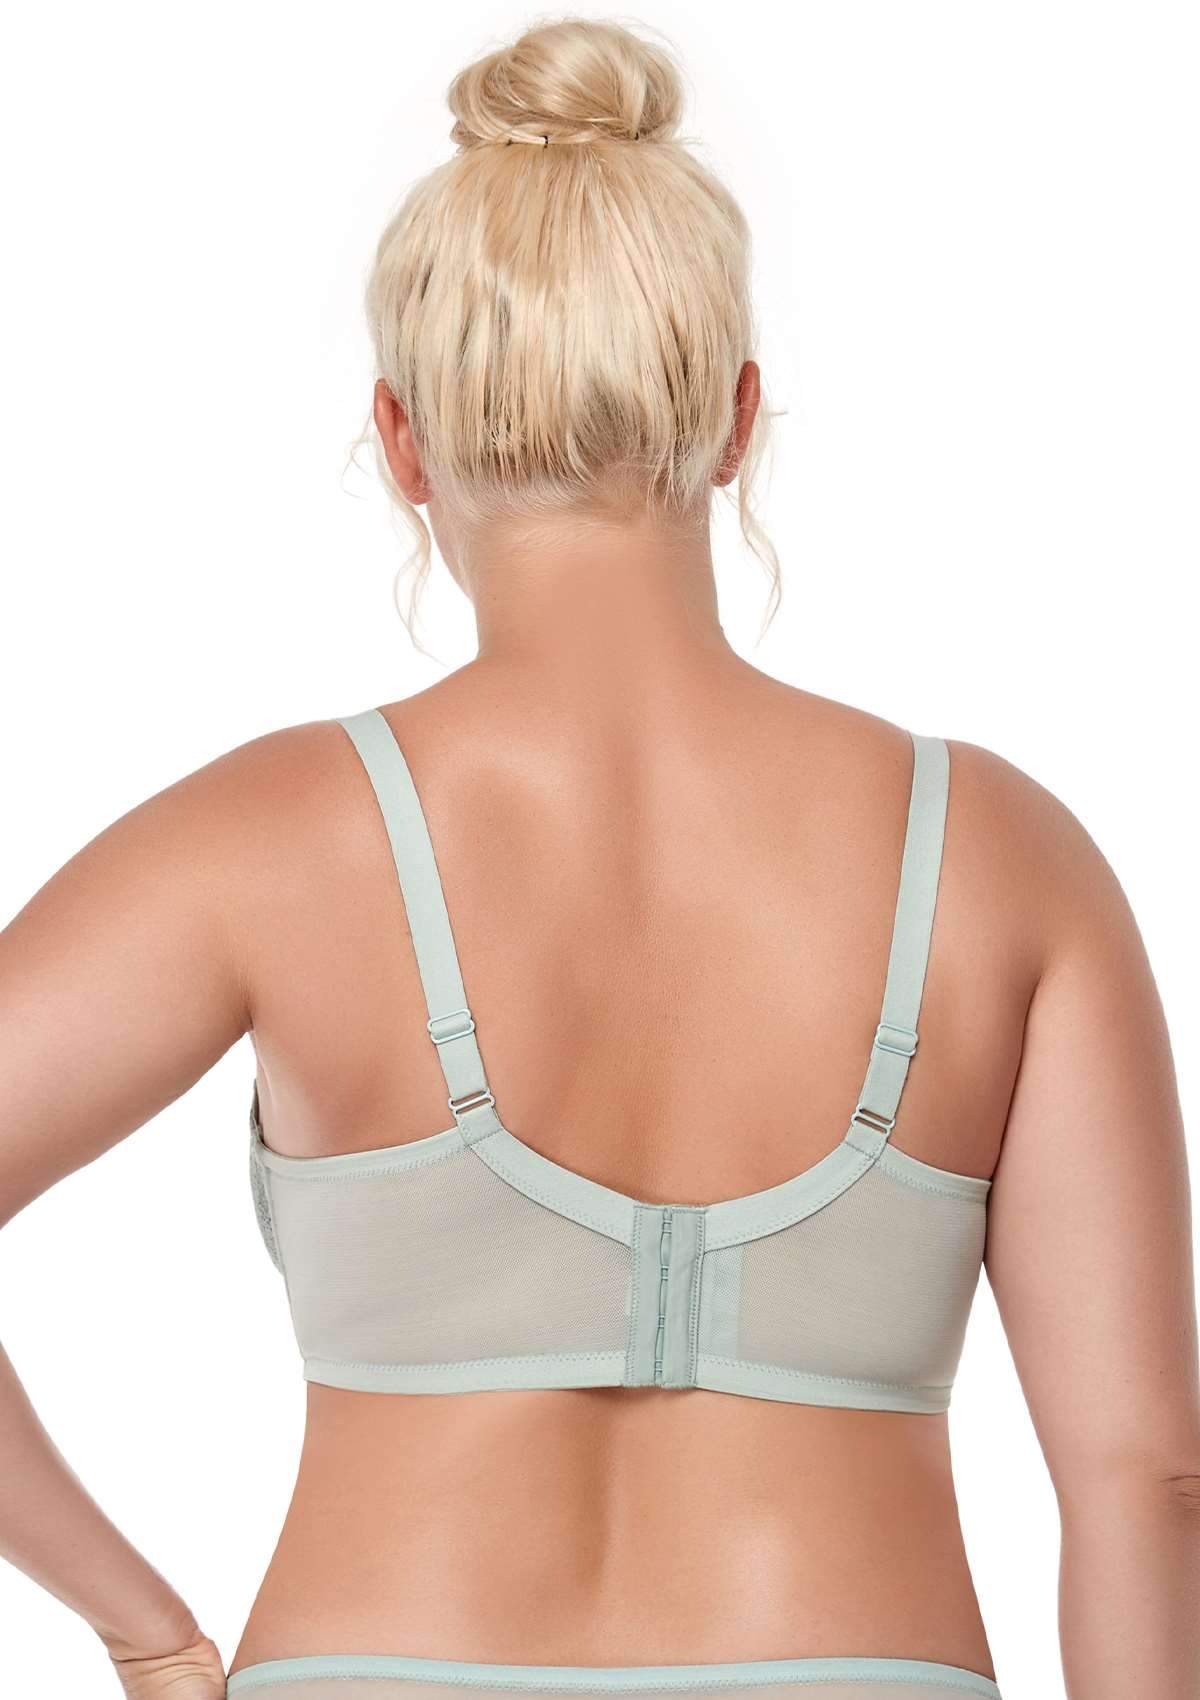 HSIA All-Over Floral Lace: Best Bra For Elderly With Sagging Breasts - Crystal Blue / 36 / DD/E